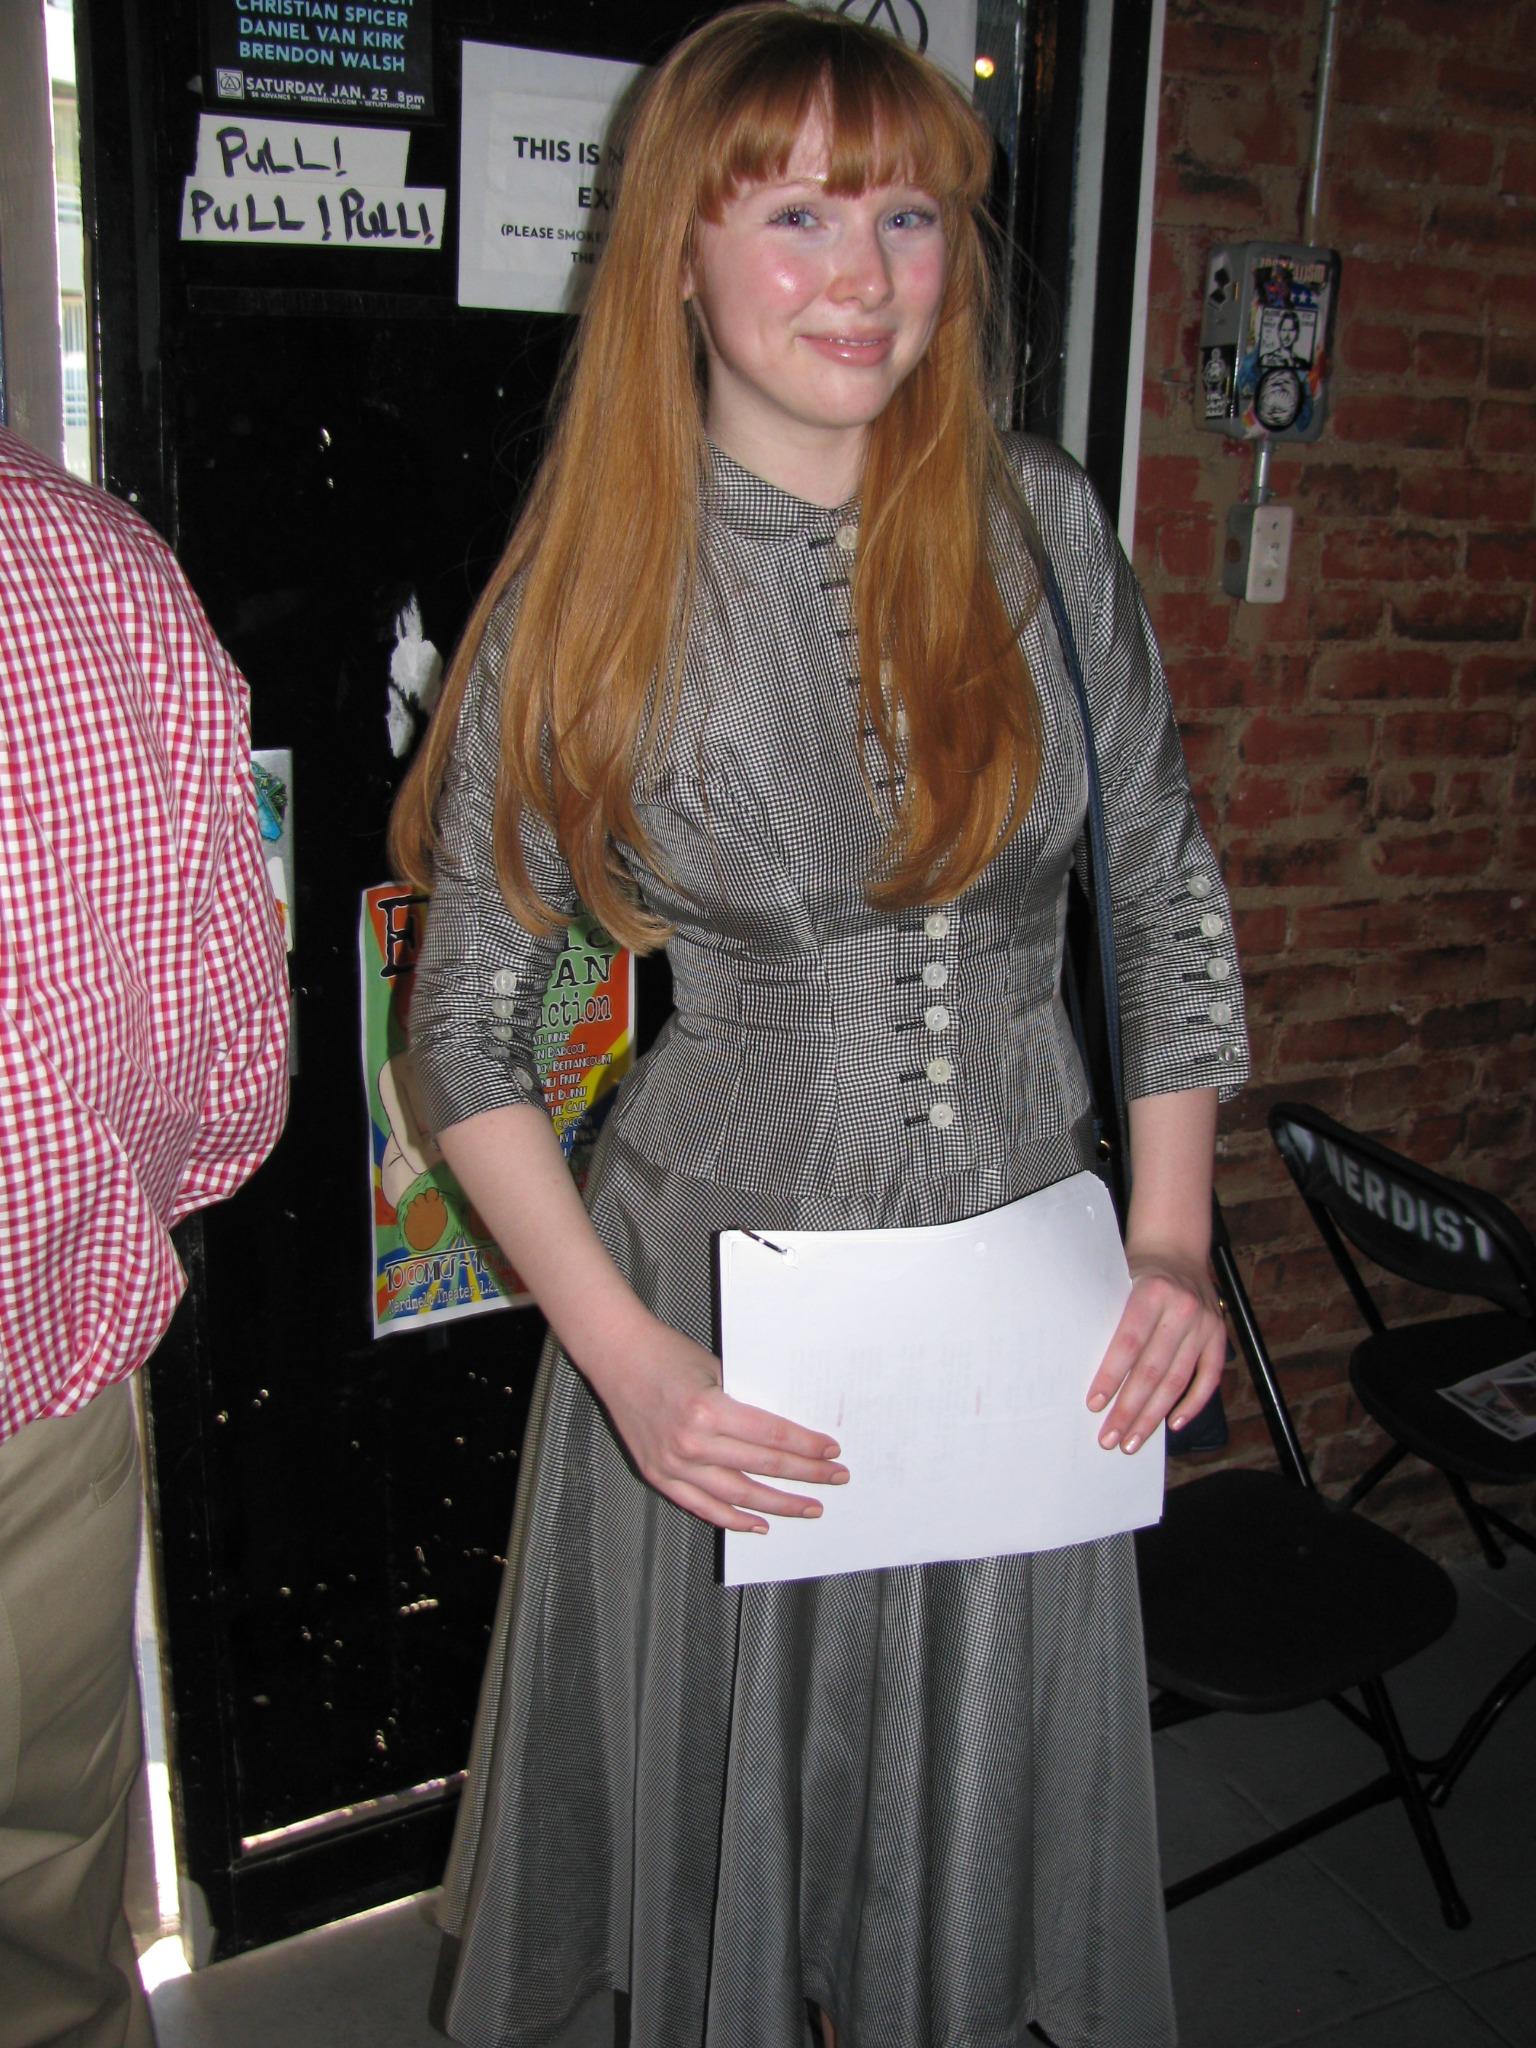 Wishing a very happy and special birthday to Molly Quinn of and - her 21st! 